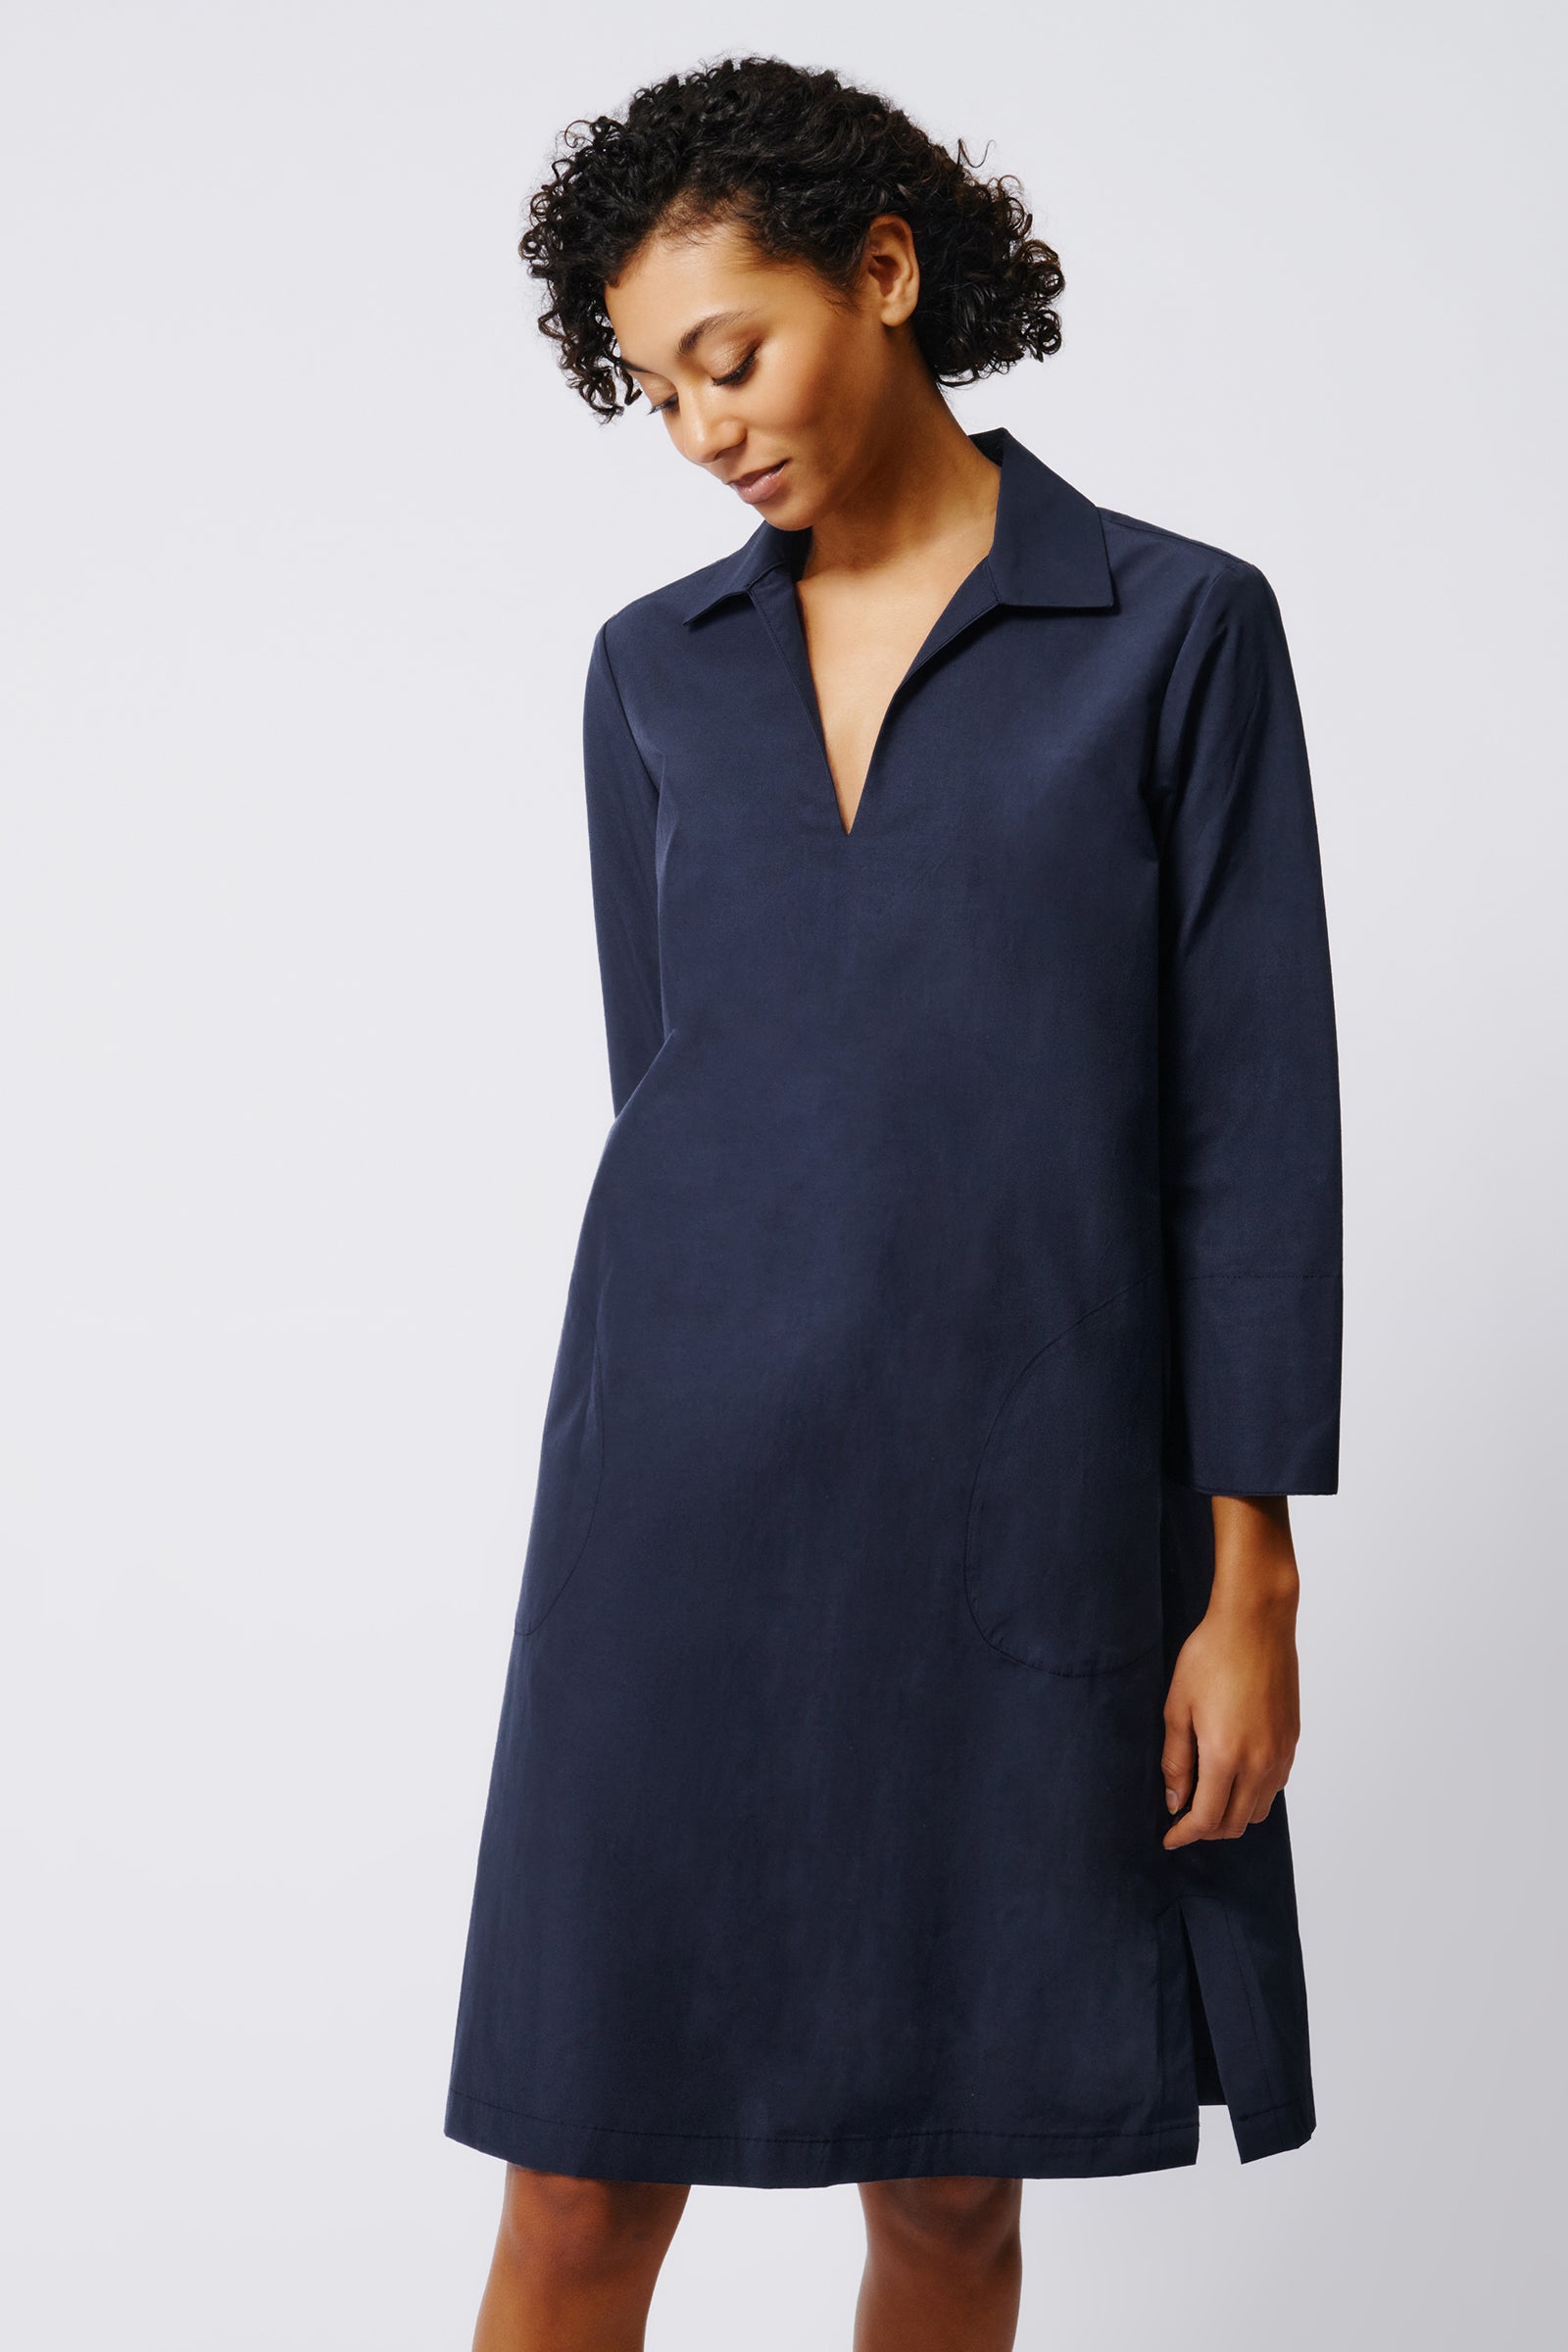 Kal Rieman Collared V Neck Dress in Navy Broadcloth on Model Front View Crop 2